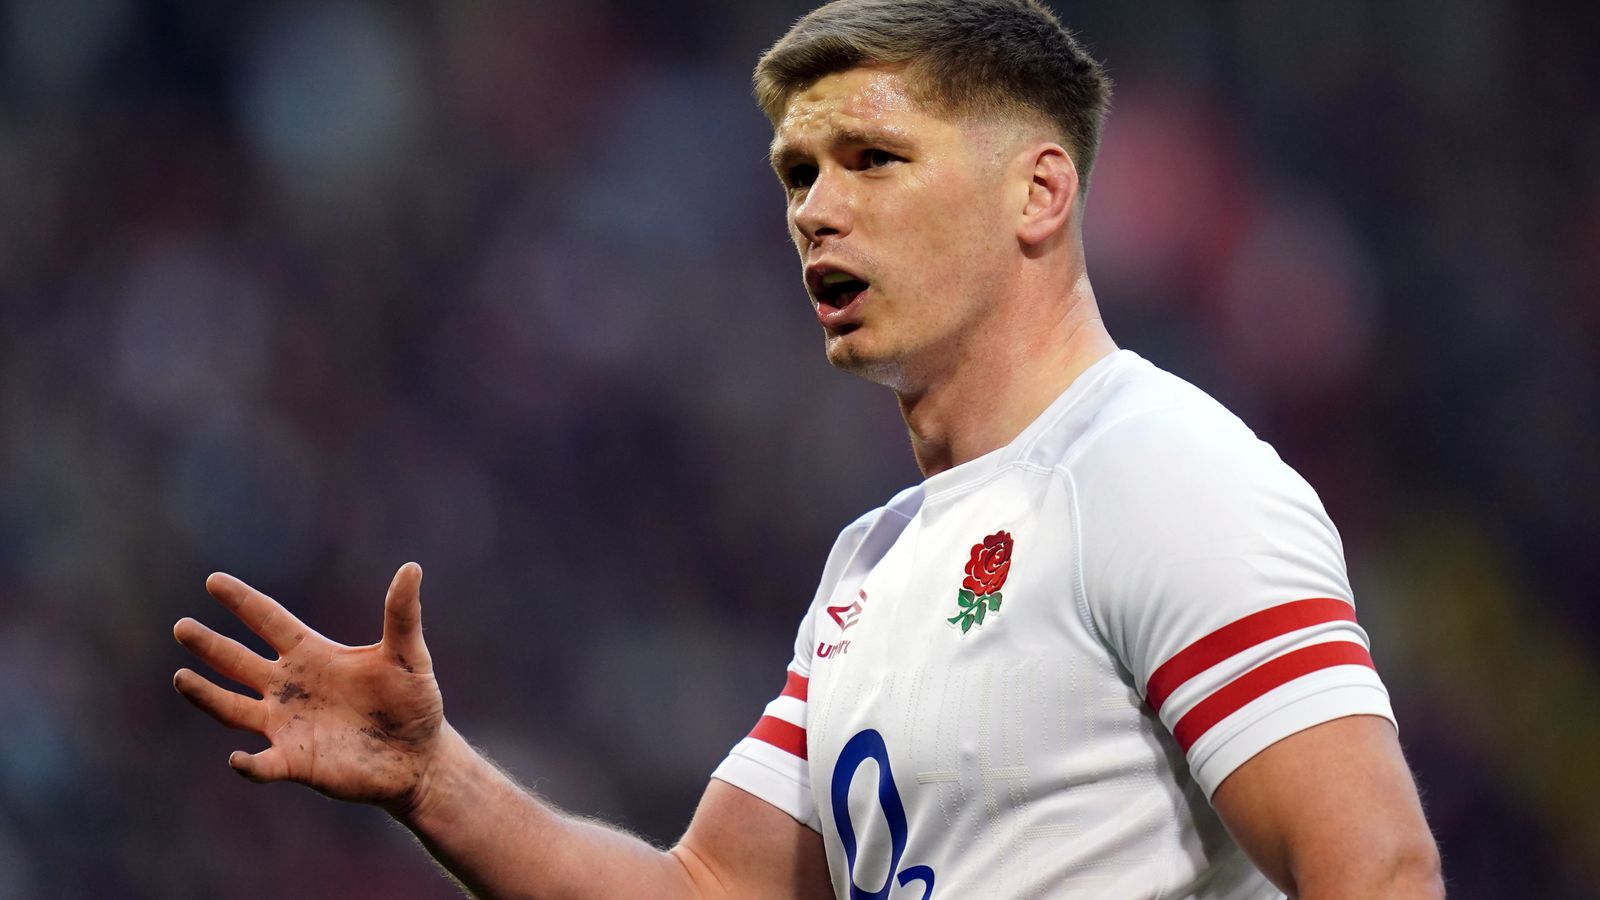 Owen Farrell receives shock World Cup reprieve as England captain’s red card is overturned | Rugby Union News